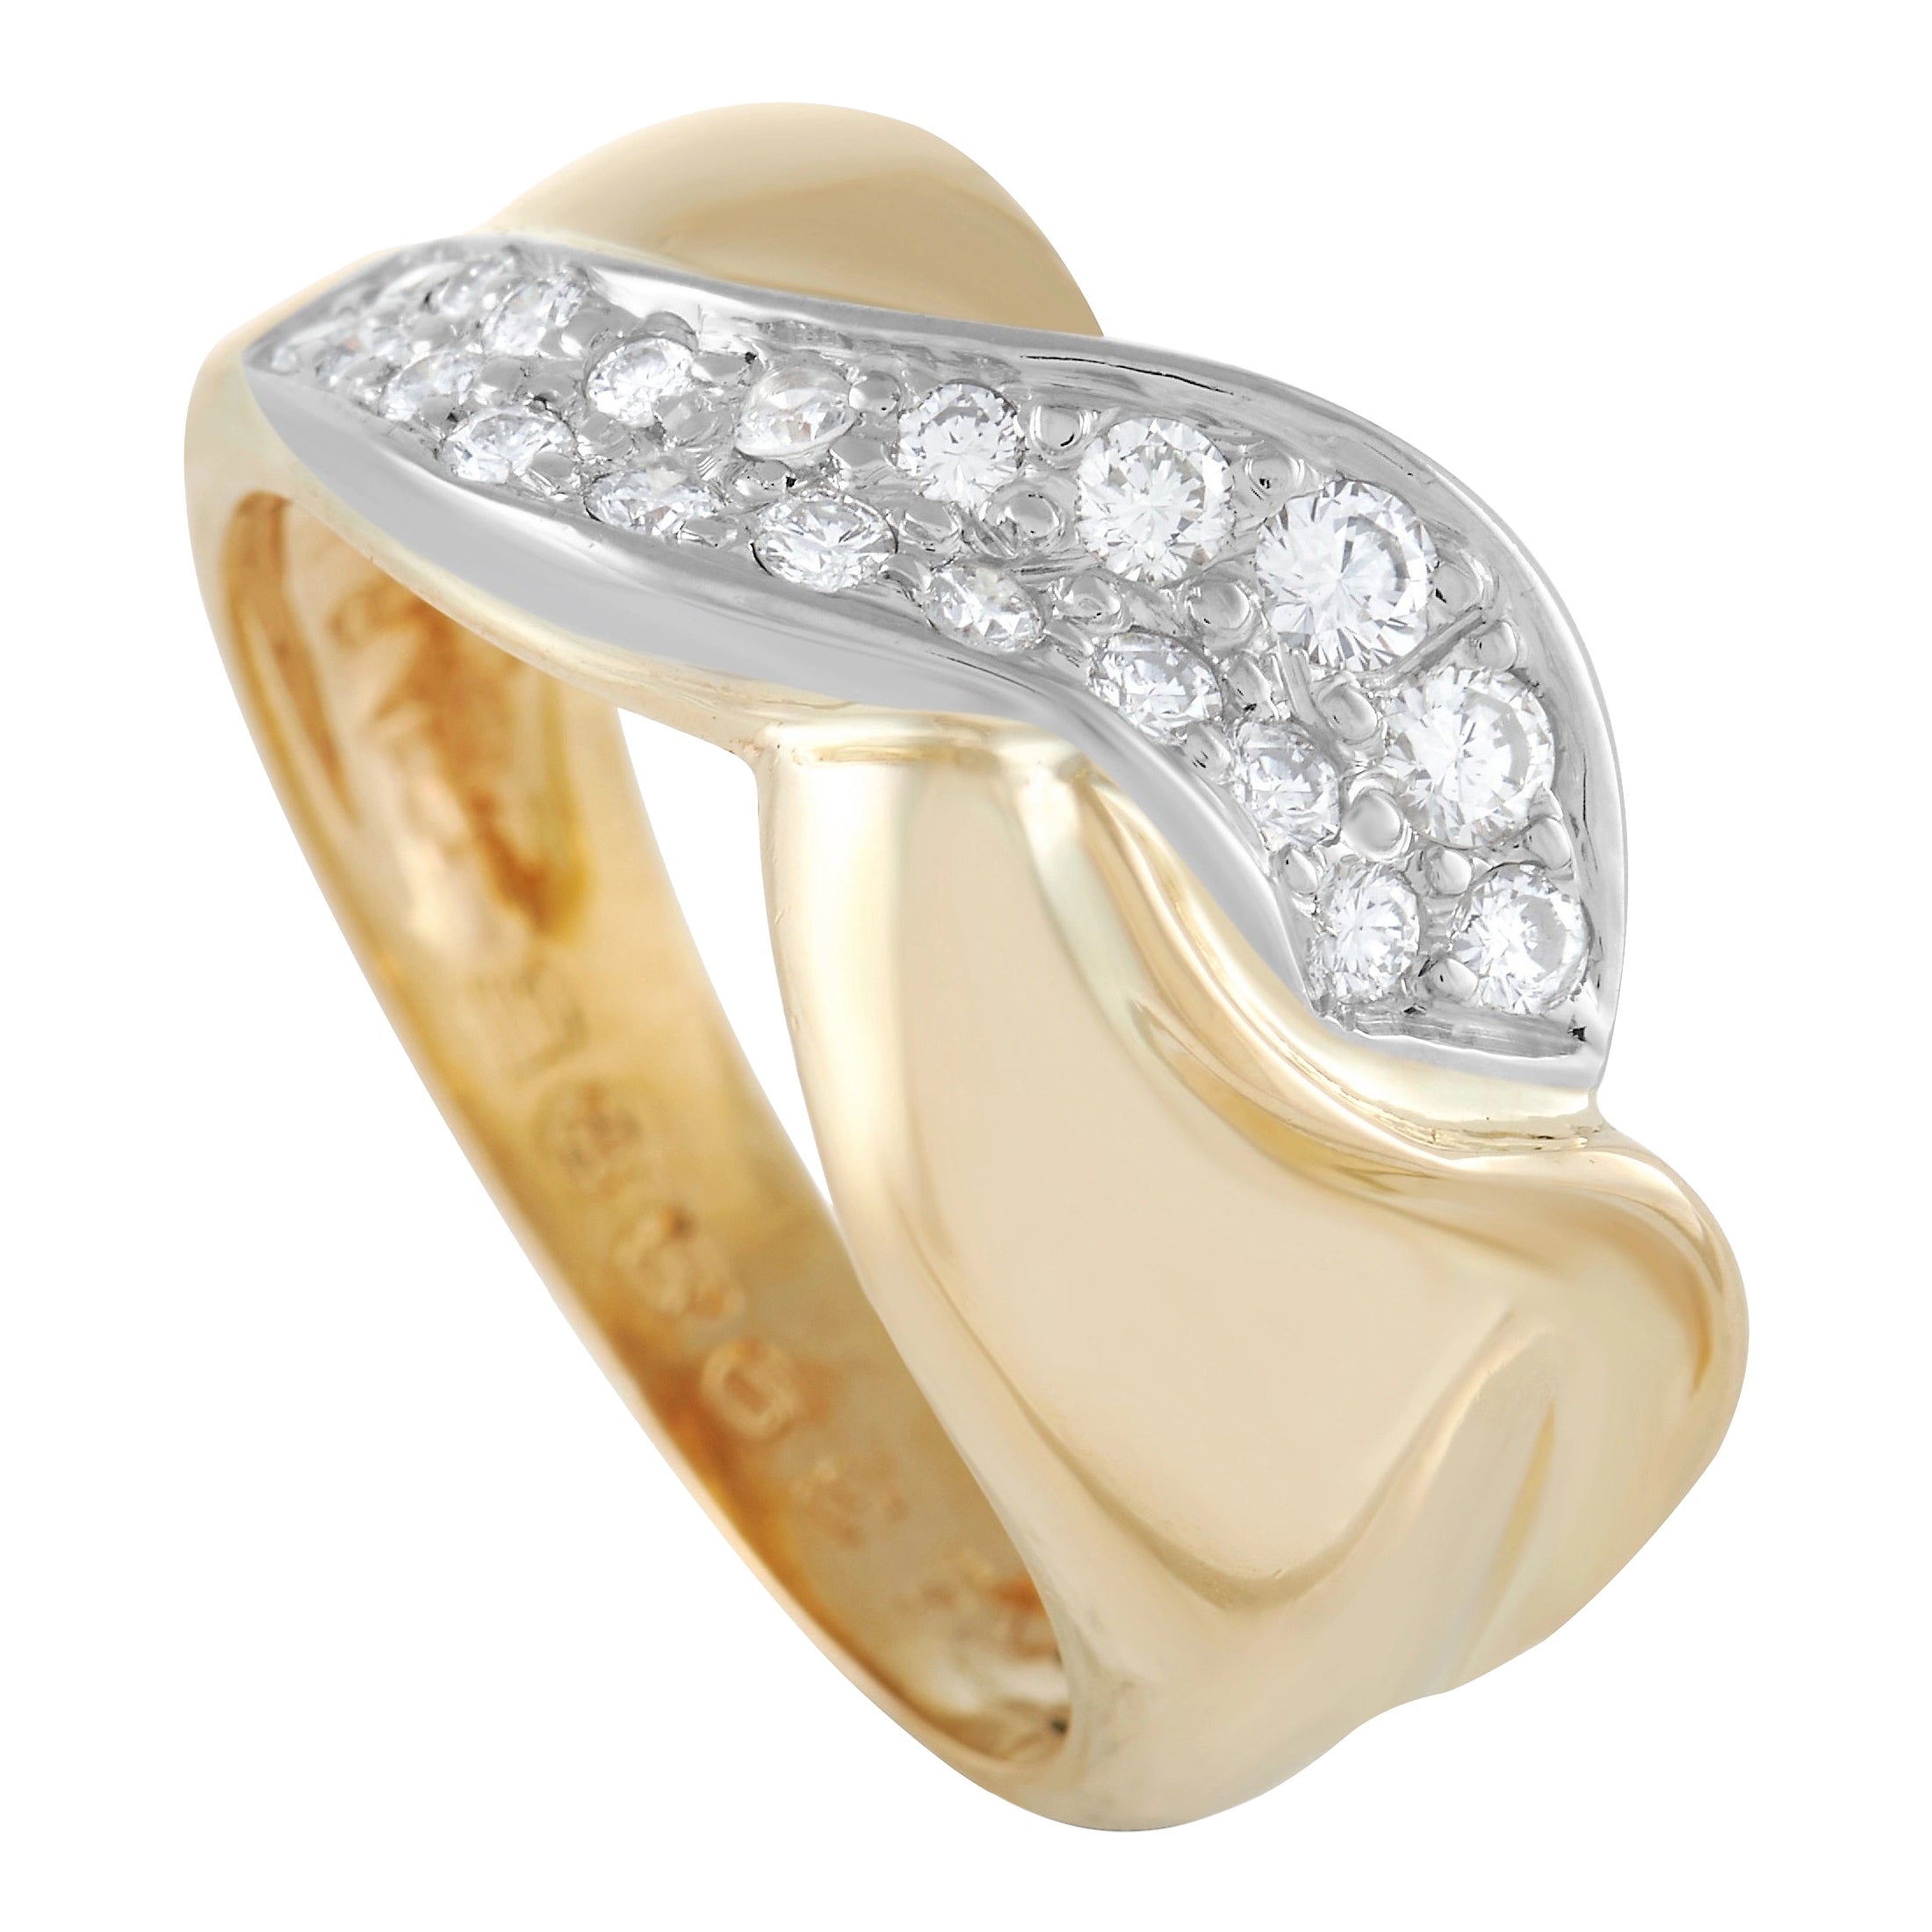 Chaumet 18K Yellow Gold 0.30 Ct Diamond Cocktail Ring